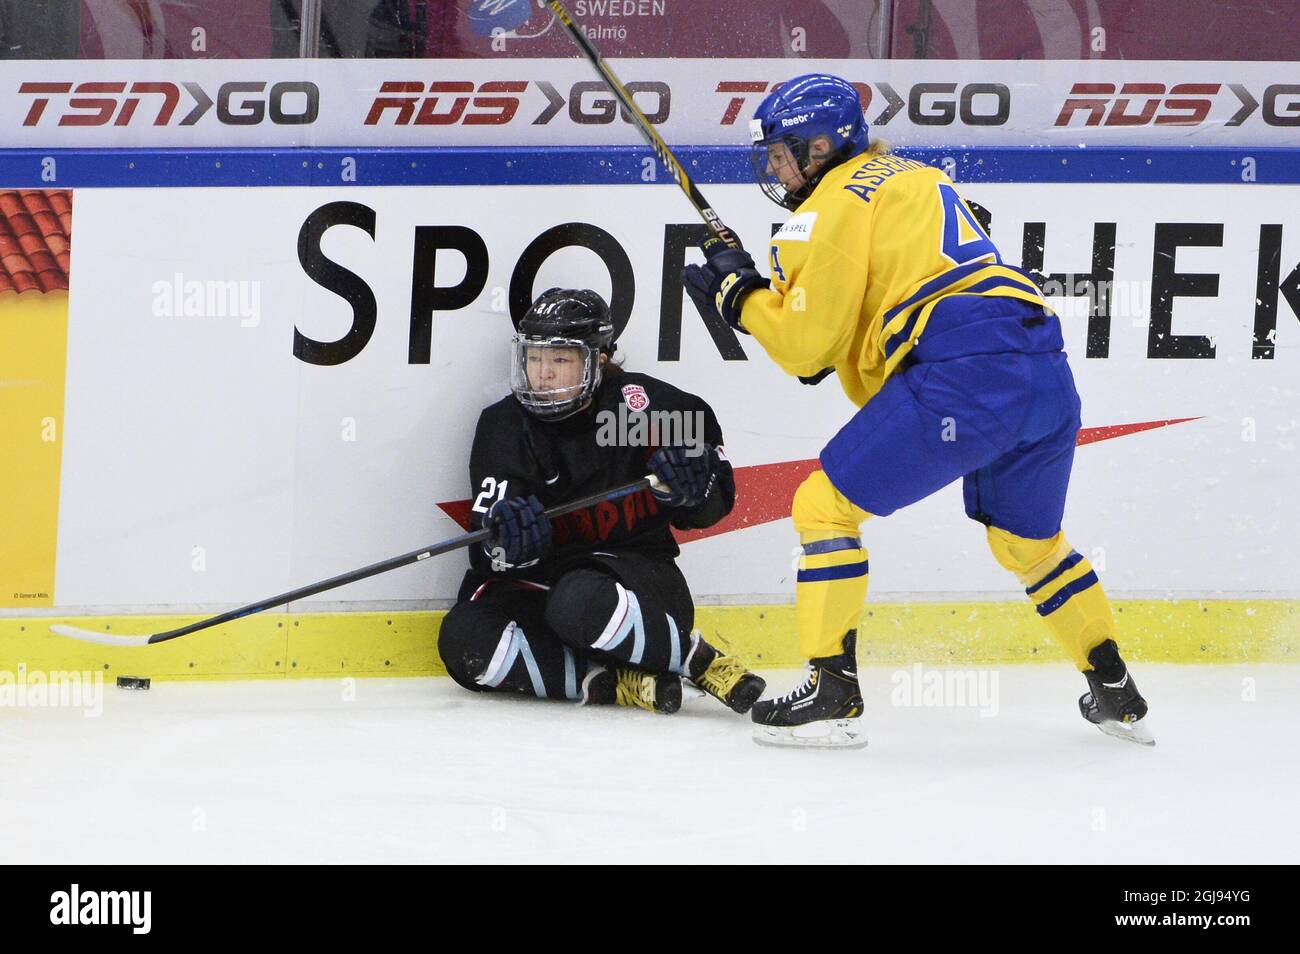 Japans Hanae Kubo (sitting) vies with Swedens Jenni Asserholt during the 2015 IIHF Ice Hockey Womens World Championship group B match between Sweden and Japan at Malmo Isstadion in Malmo, southern Sweden,